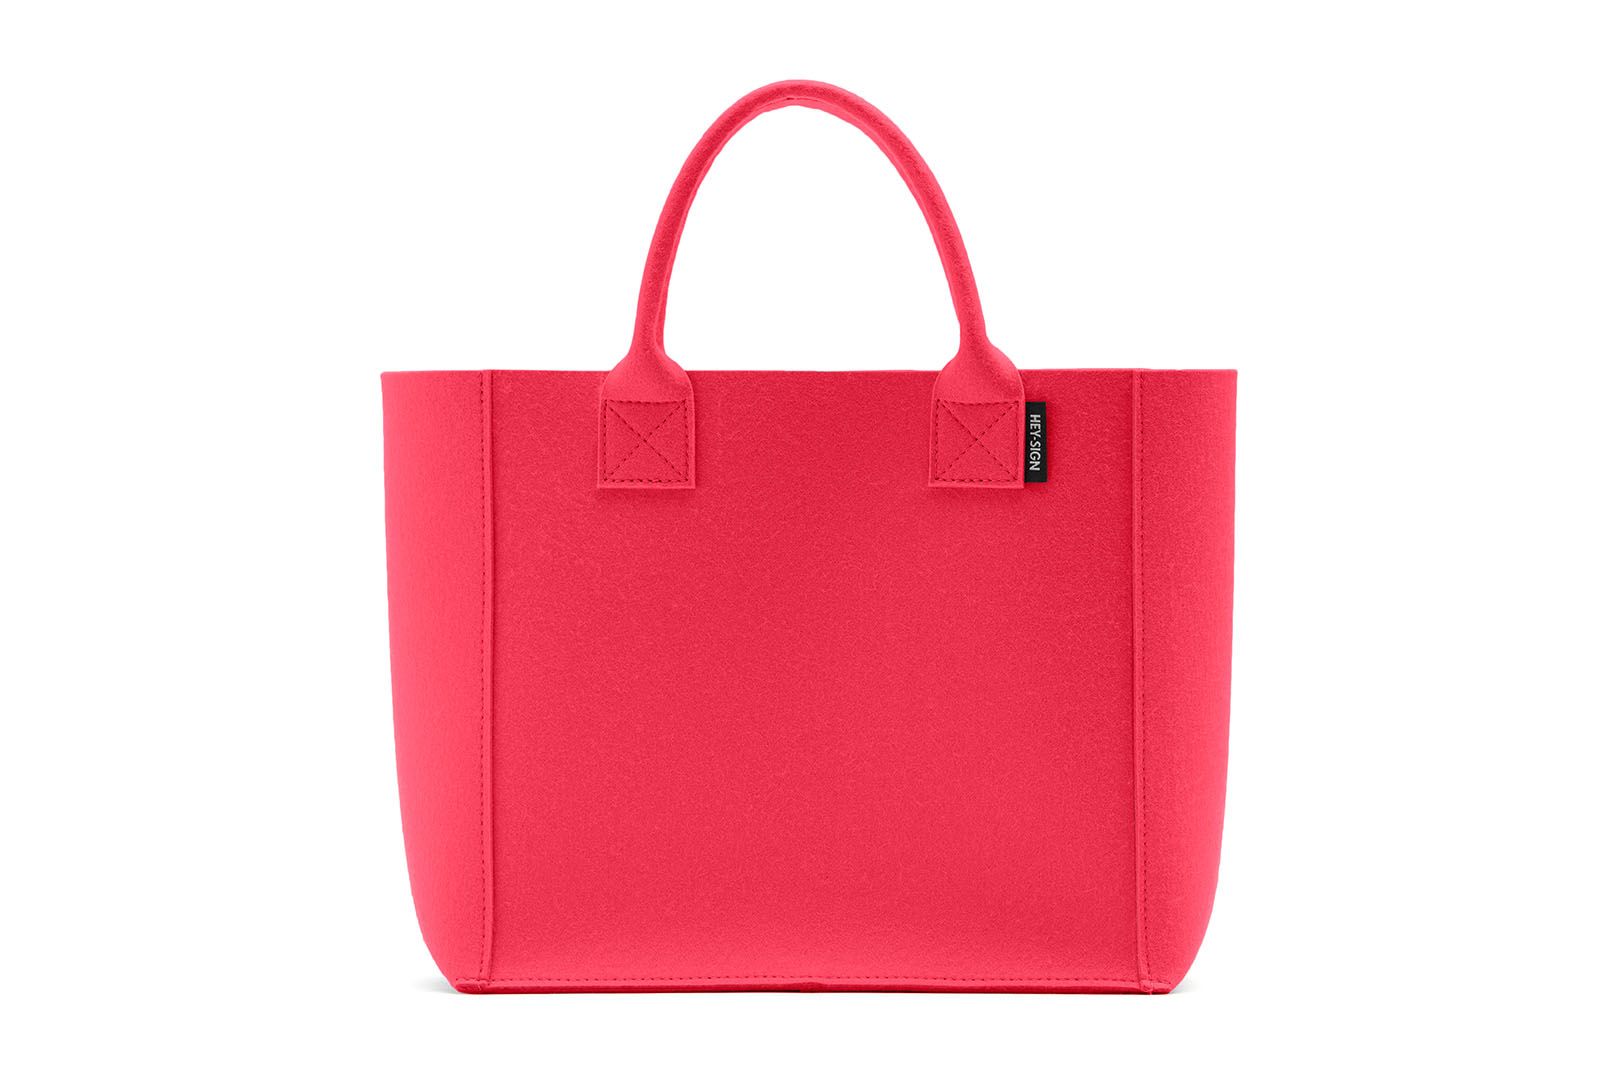 HEY-Sign Tasche Pure in der Farbe "Coral"